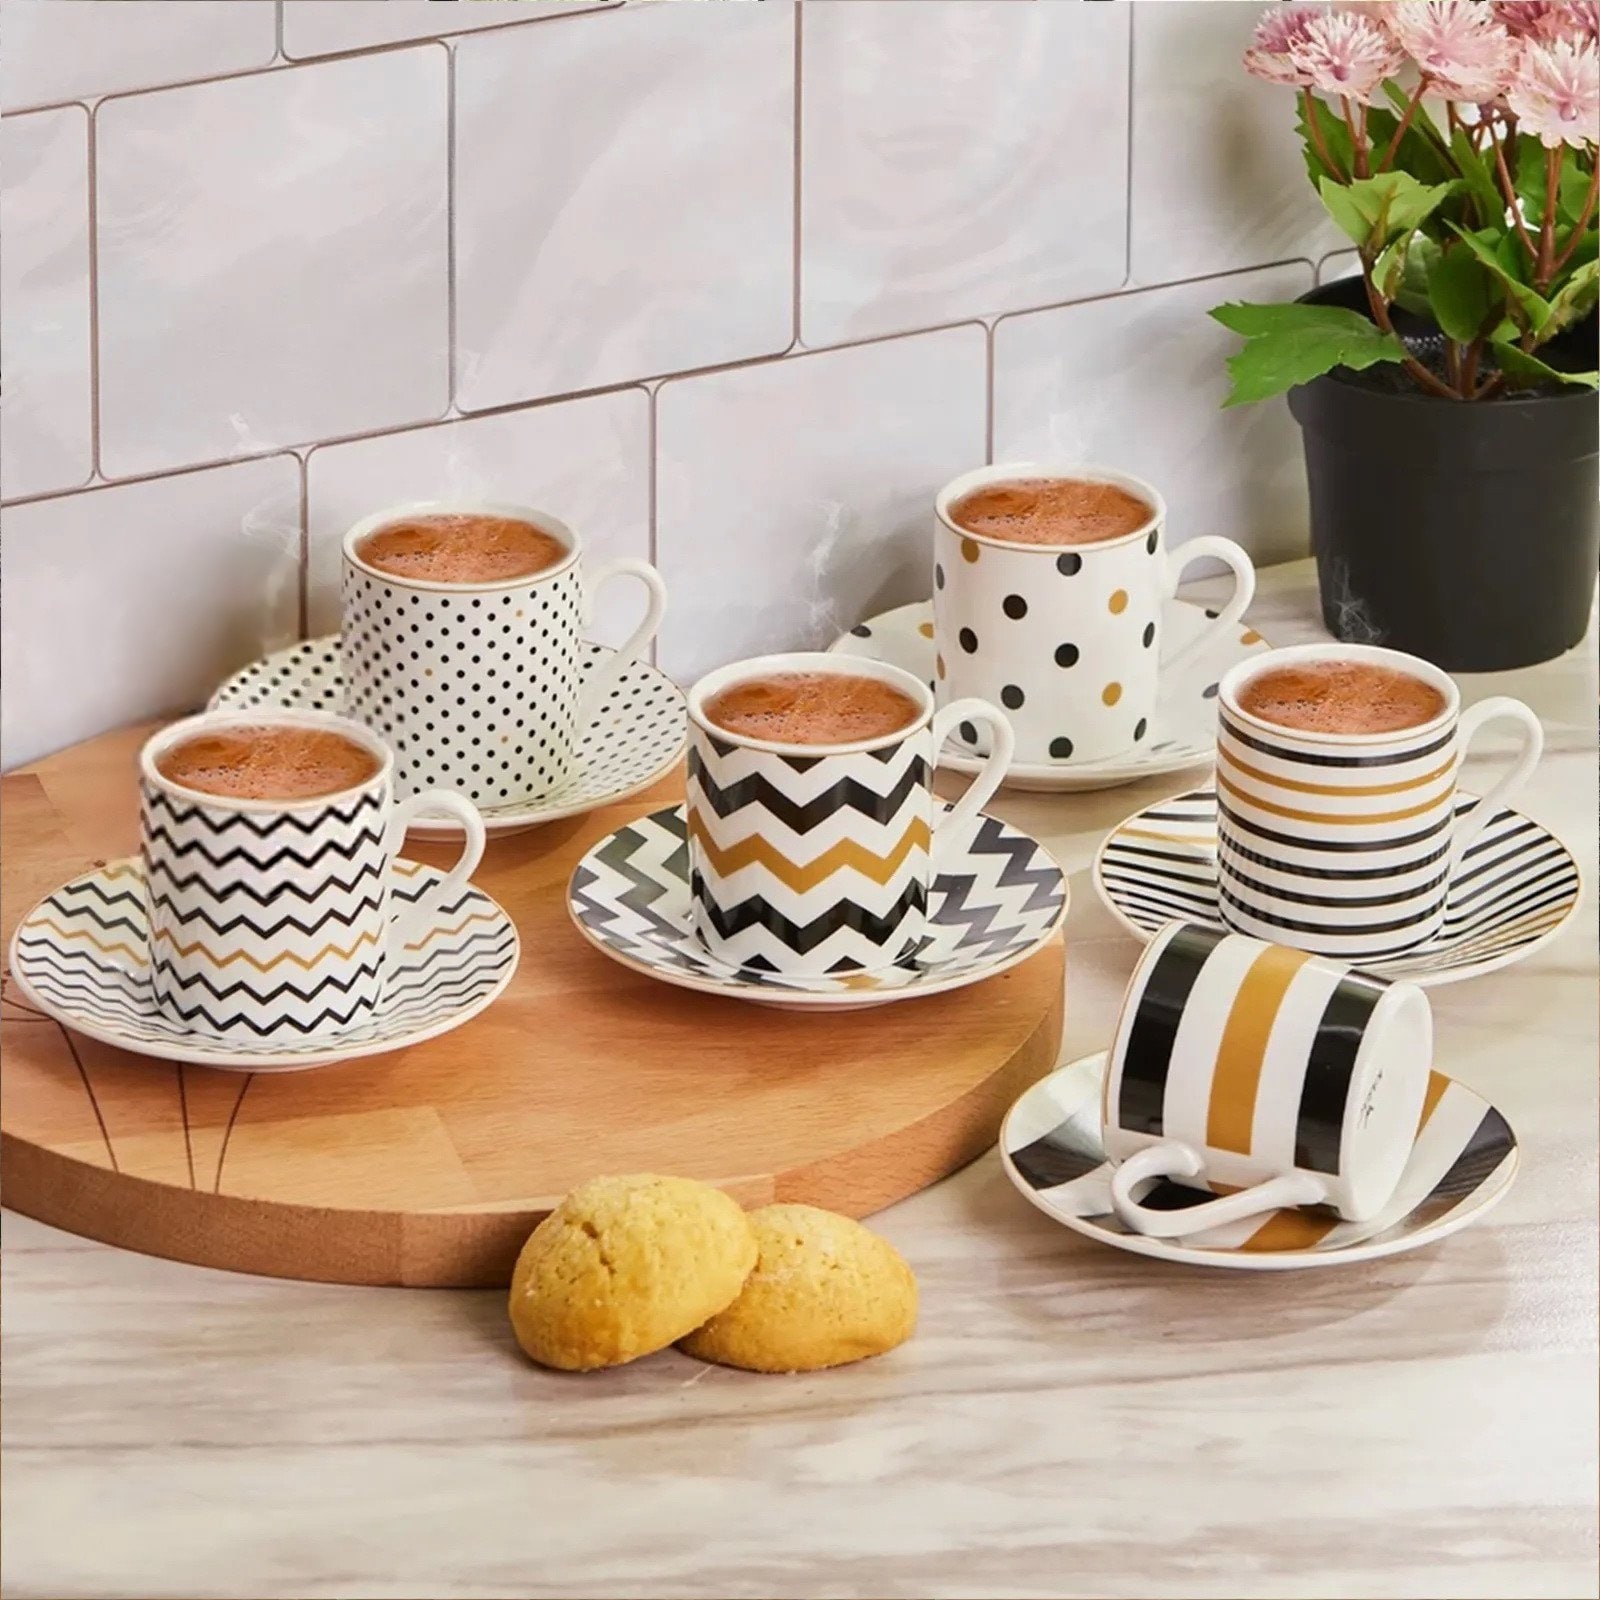 https://ak1.ostkcdn.com/images/products/is/images/direct/471ad566329544208cb81fed81b8283e30a2a1dc/Karaca-Nautica-Turkish-Coffee-Cup-and-Saucer-Set-for-6.jpg